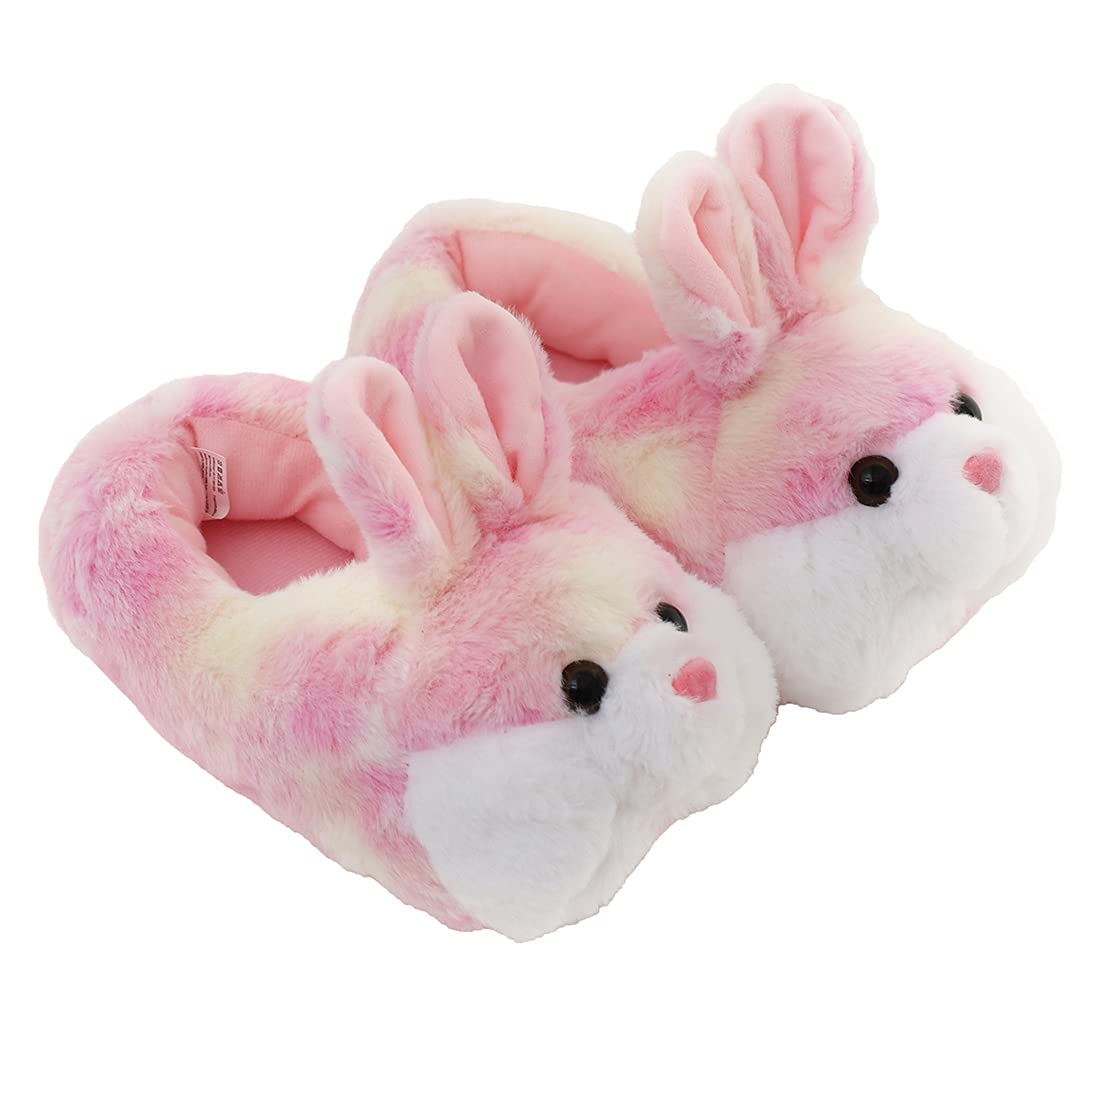 Millffy pink slippers for plush slippers womens ca